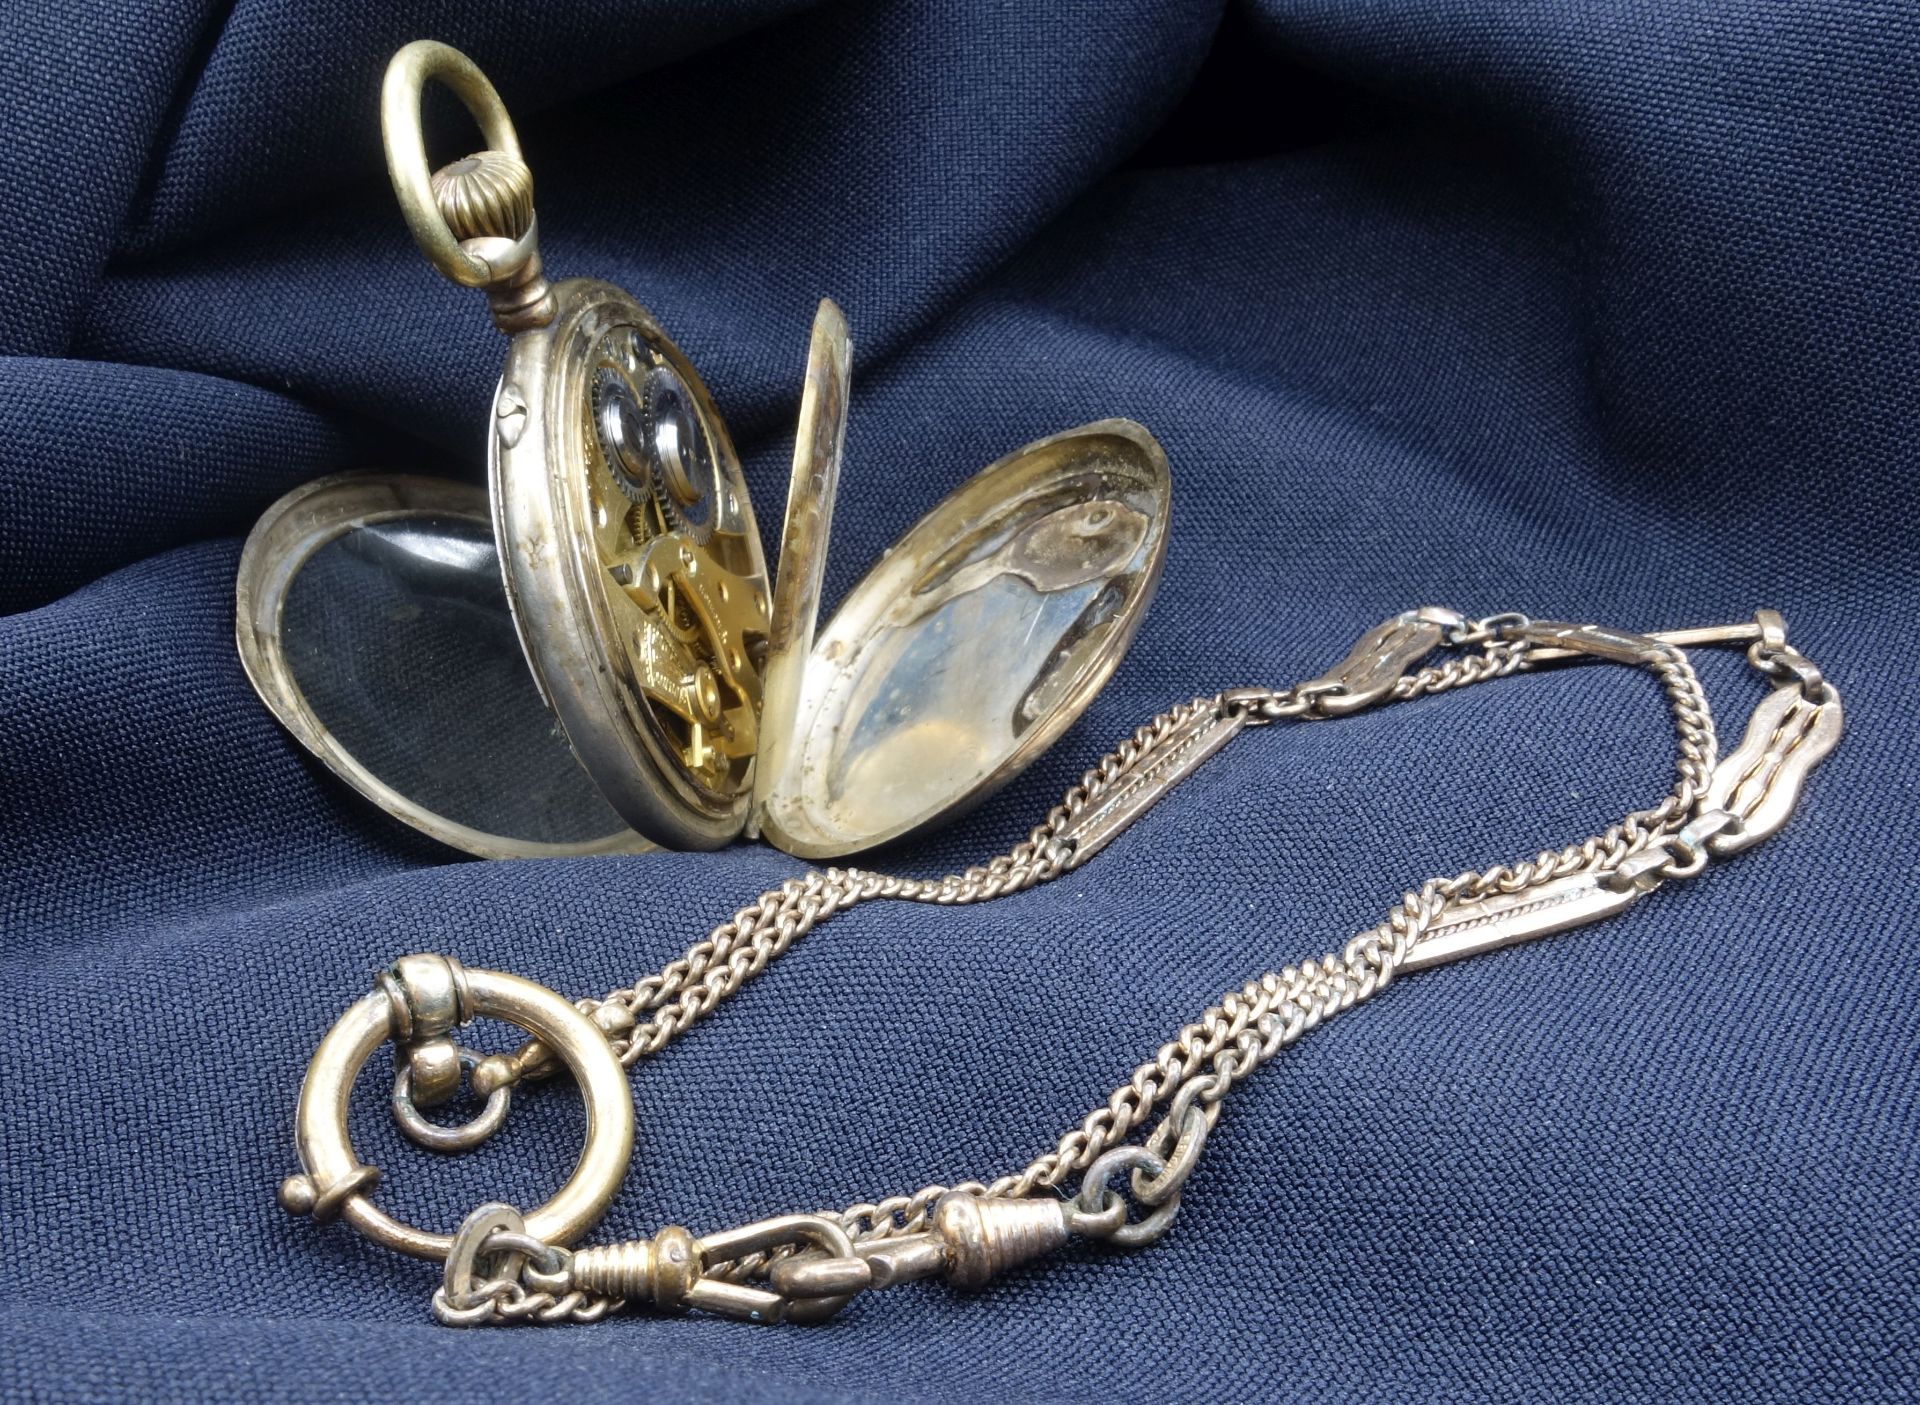 SILVER POCKET WATCH WITH POCKET WATCH CHAIN - Image 3 of 6